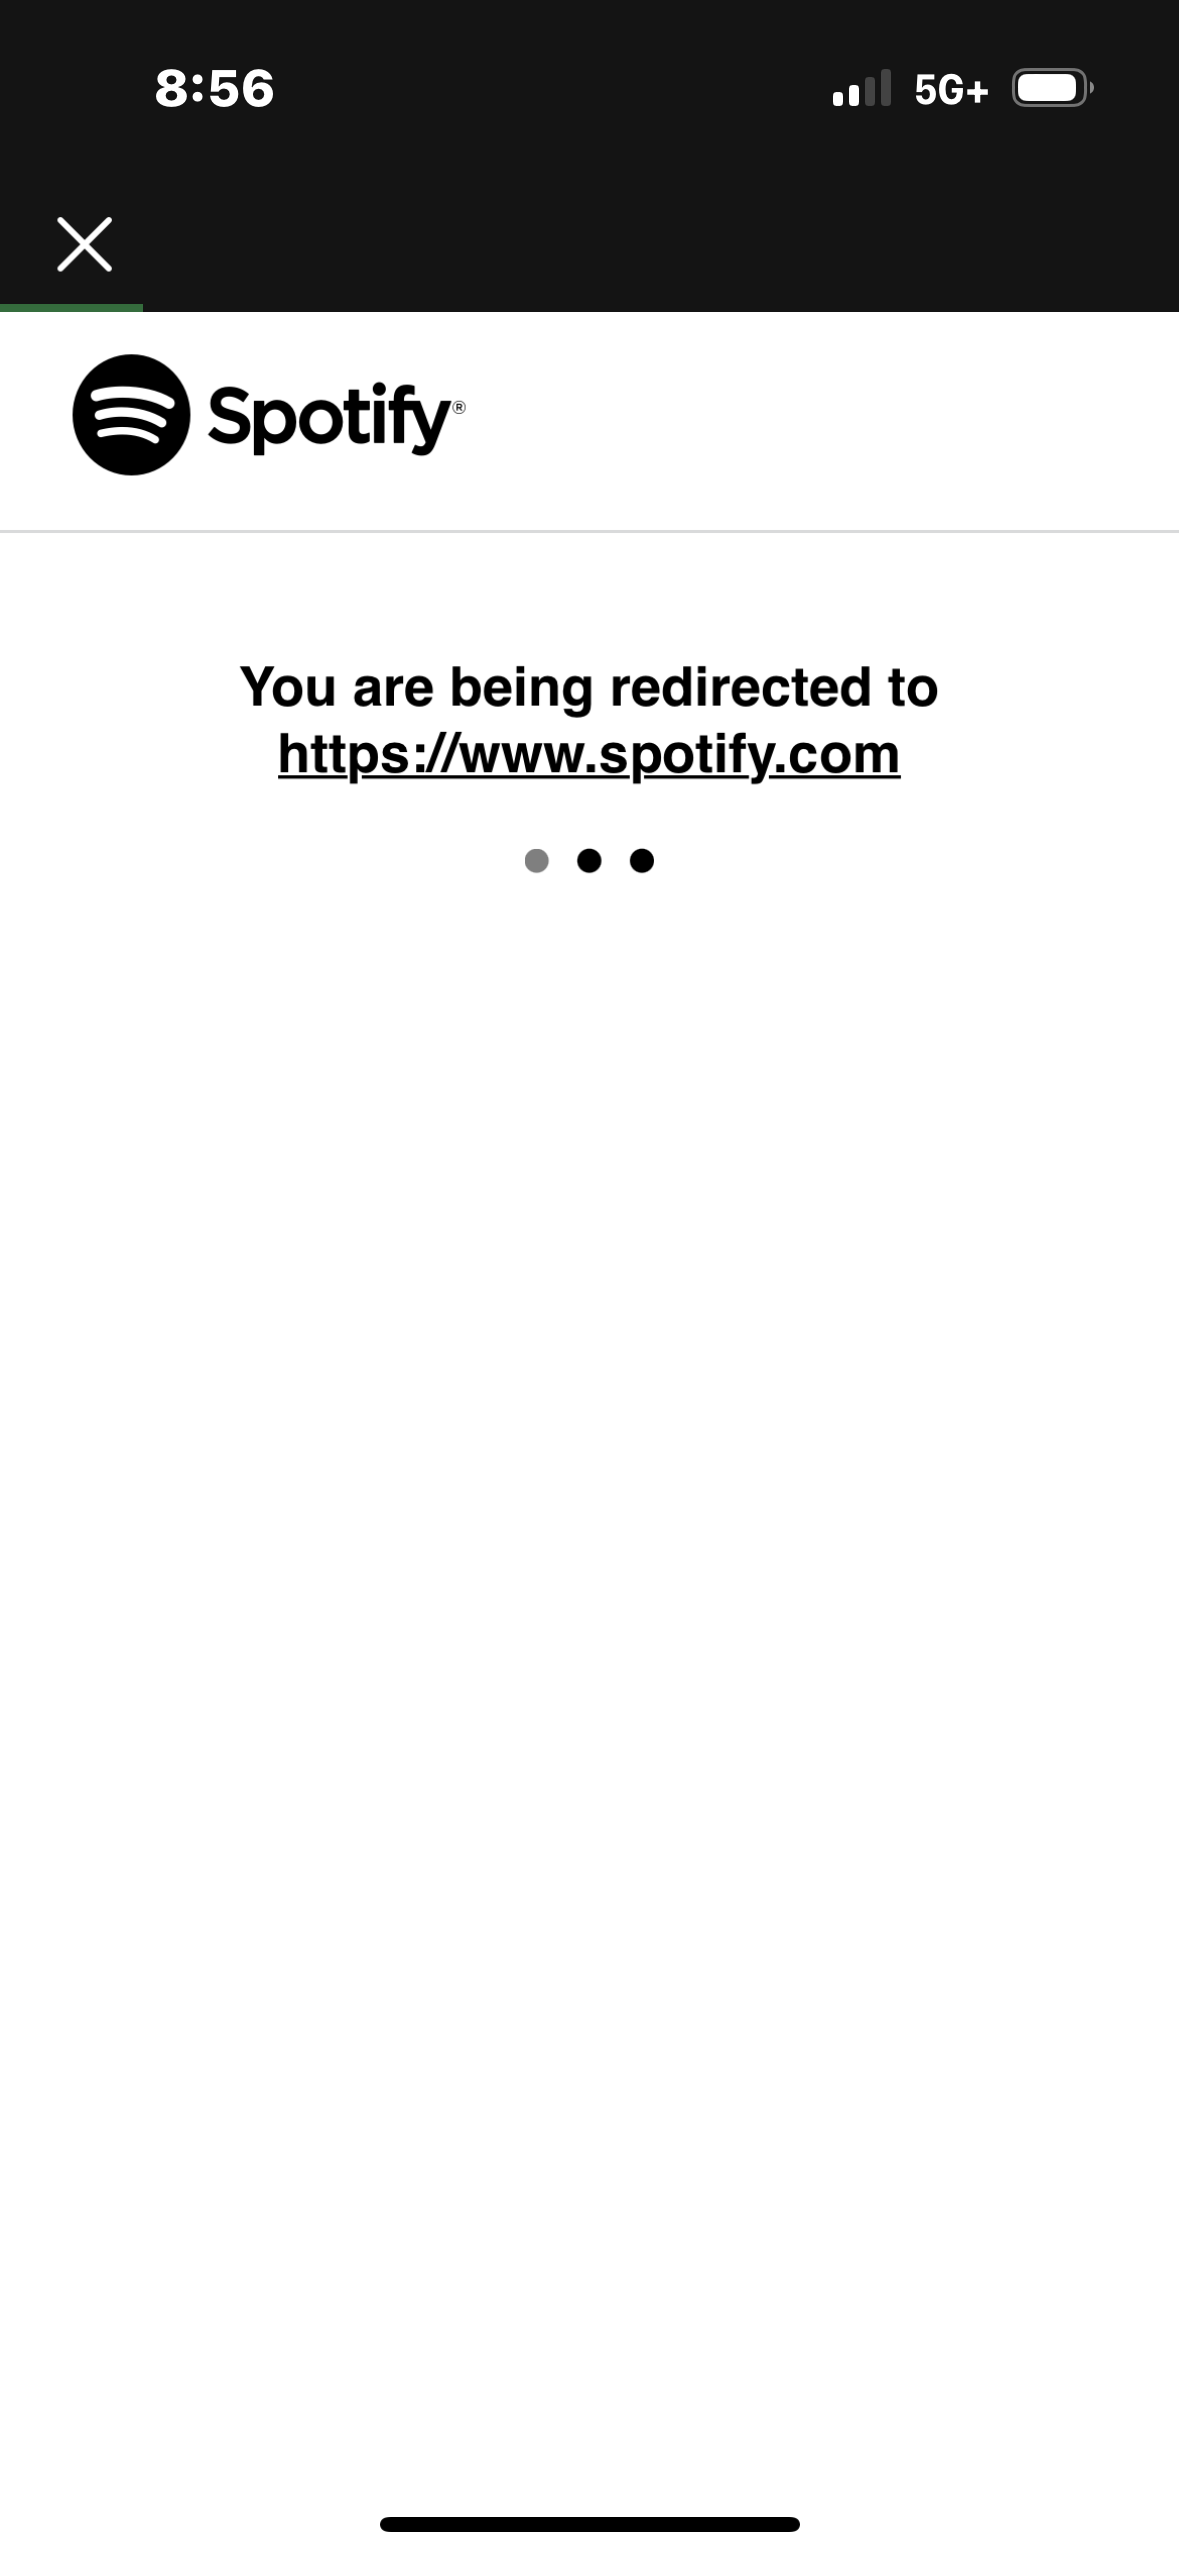 You are now being redirected - The Spotify Community